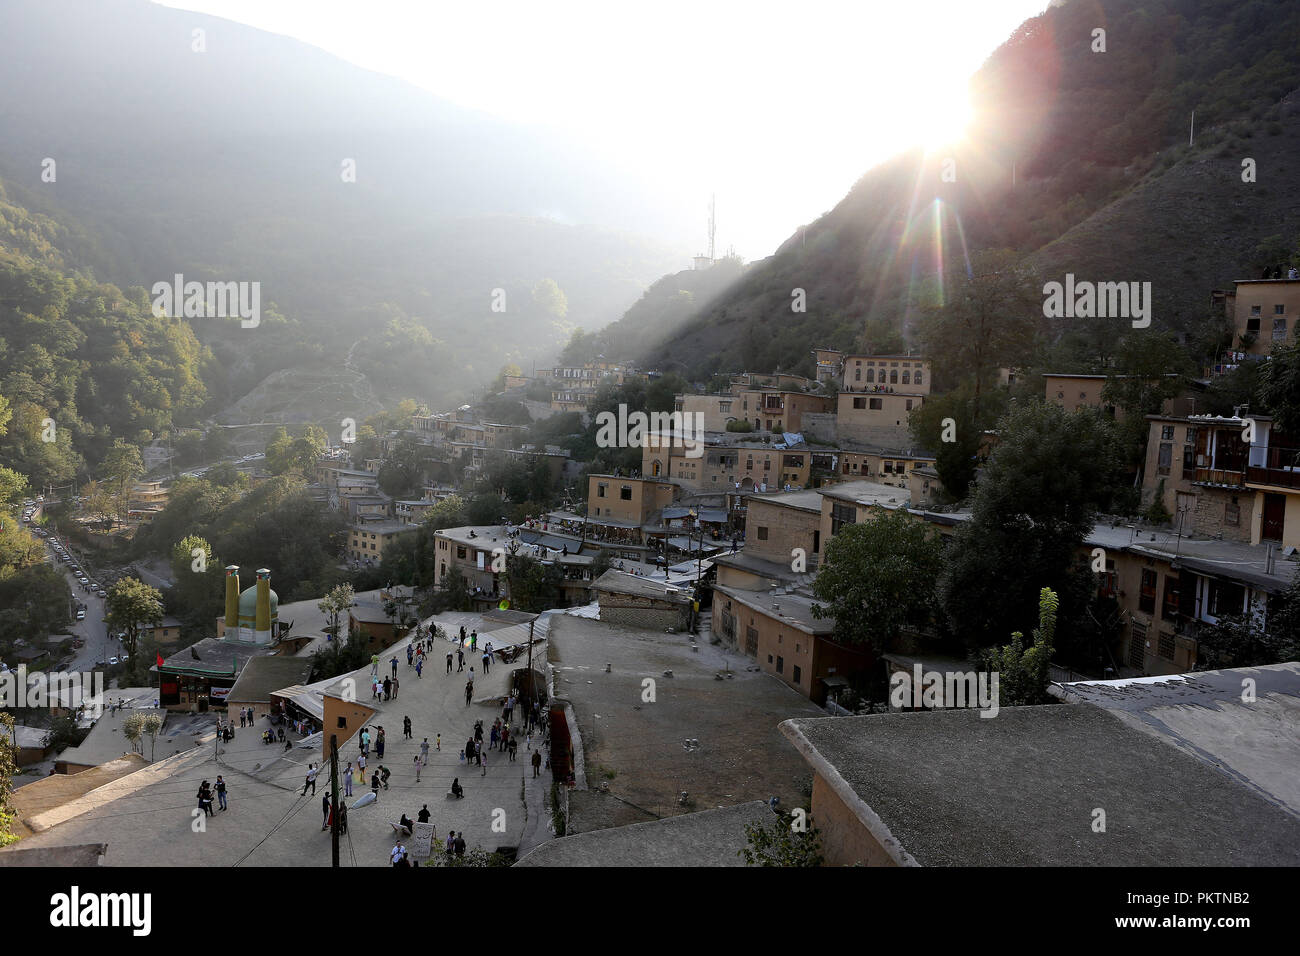 Masouleh. 14th Sep, 2018. Photo taken on Sept. 14, 2018 shows a view of Masouleh, northern Iran. The historical town of Masouleh, famous for its interconnected buildings and courtyards and roofs serving as pedestrian areas similar to streets, has an attractive nature and architecture with an antiquity of more than 1,000 years. Credit: Ahmad Halabisaz/Xinhua/Alamy Live News Stock Photo